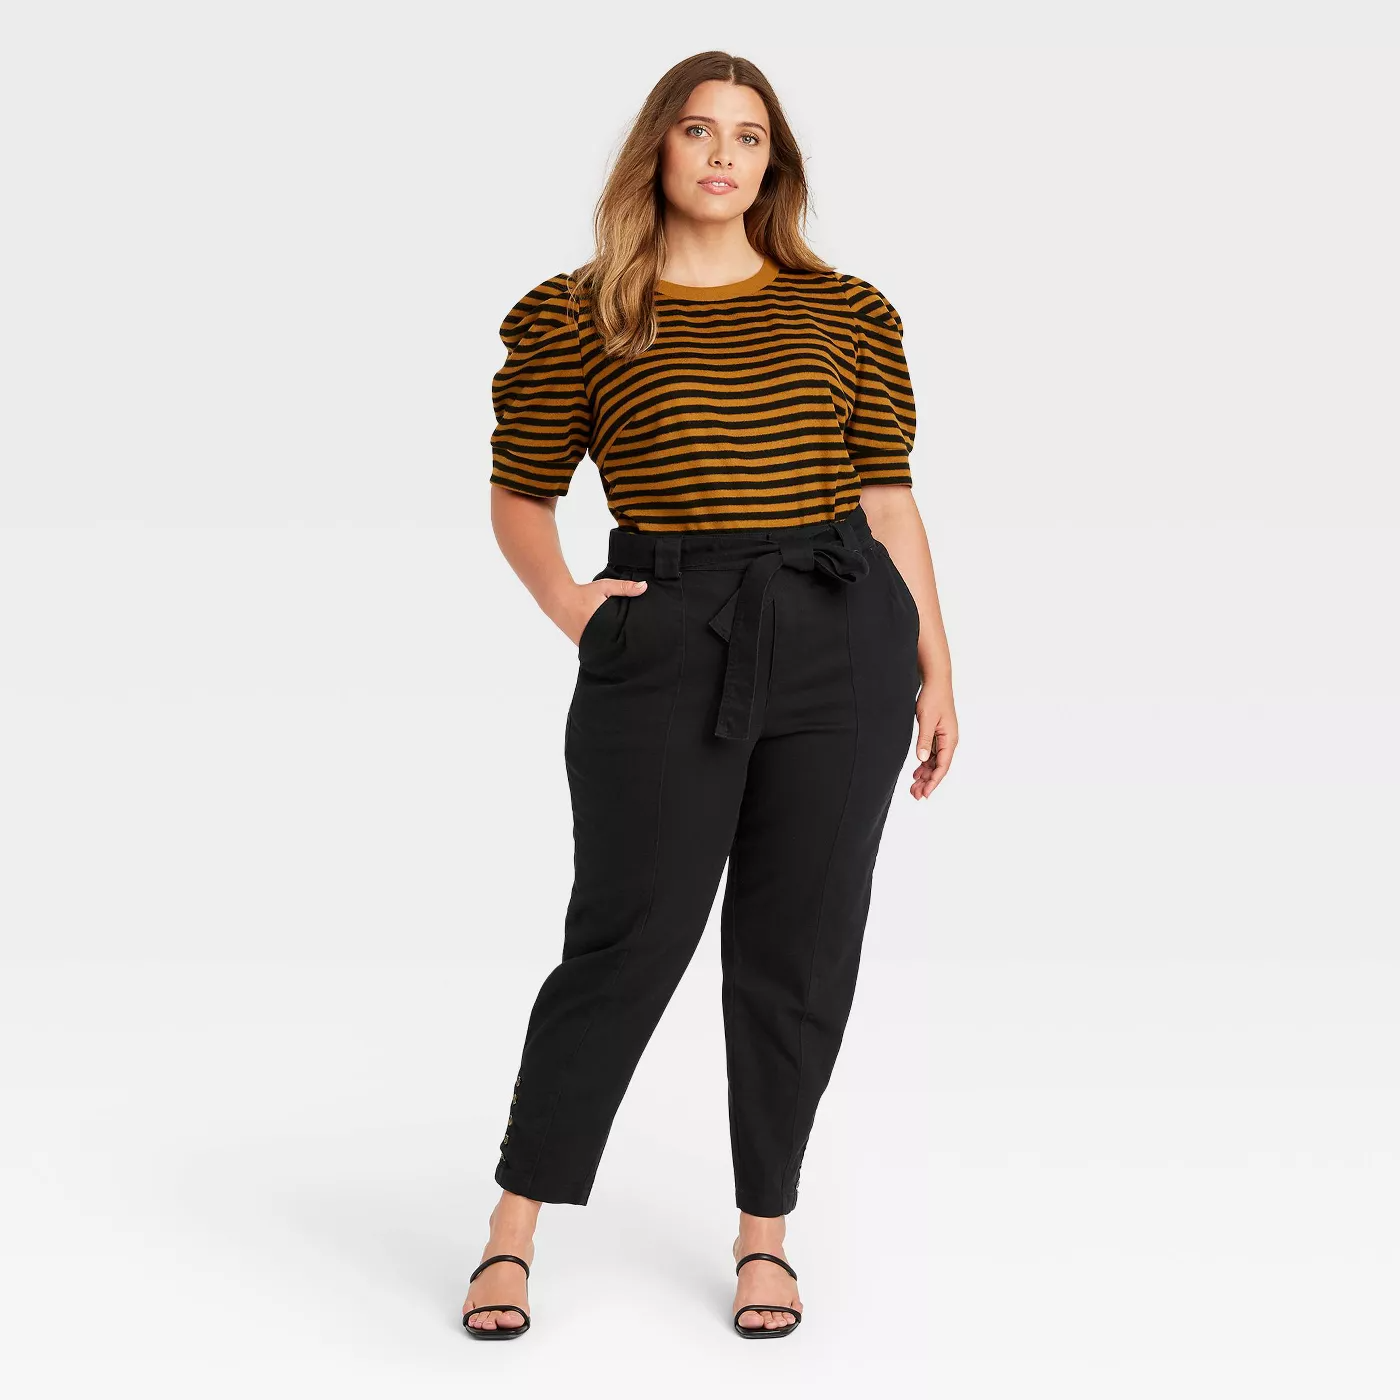 Plus-Size Friendly Workwear Picks For Going Back To T